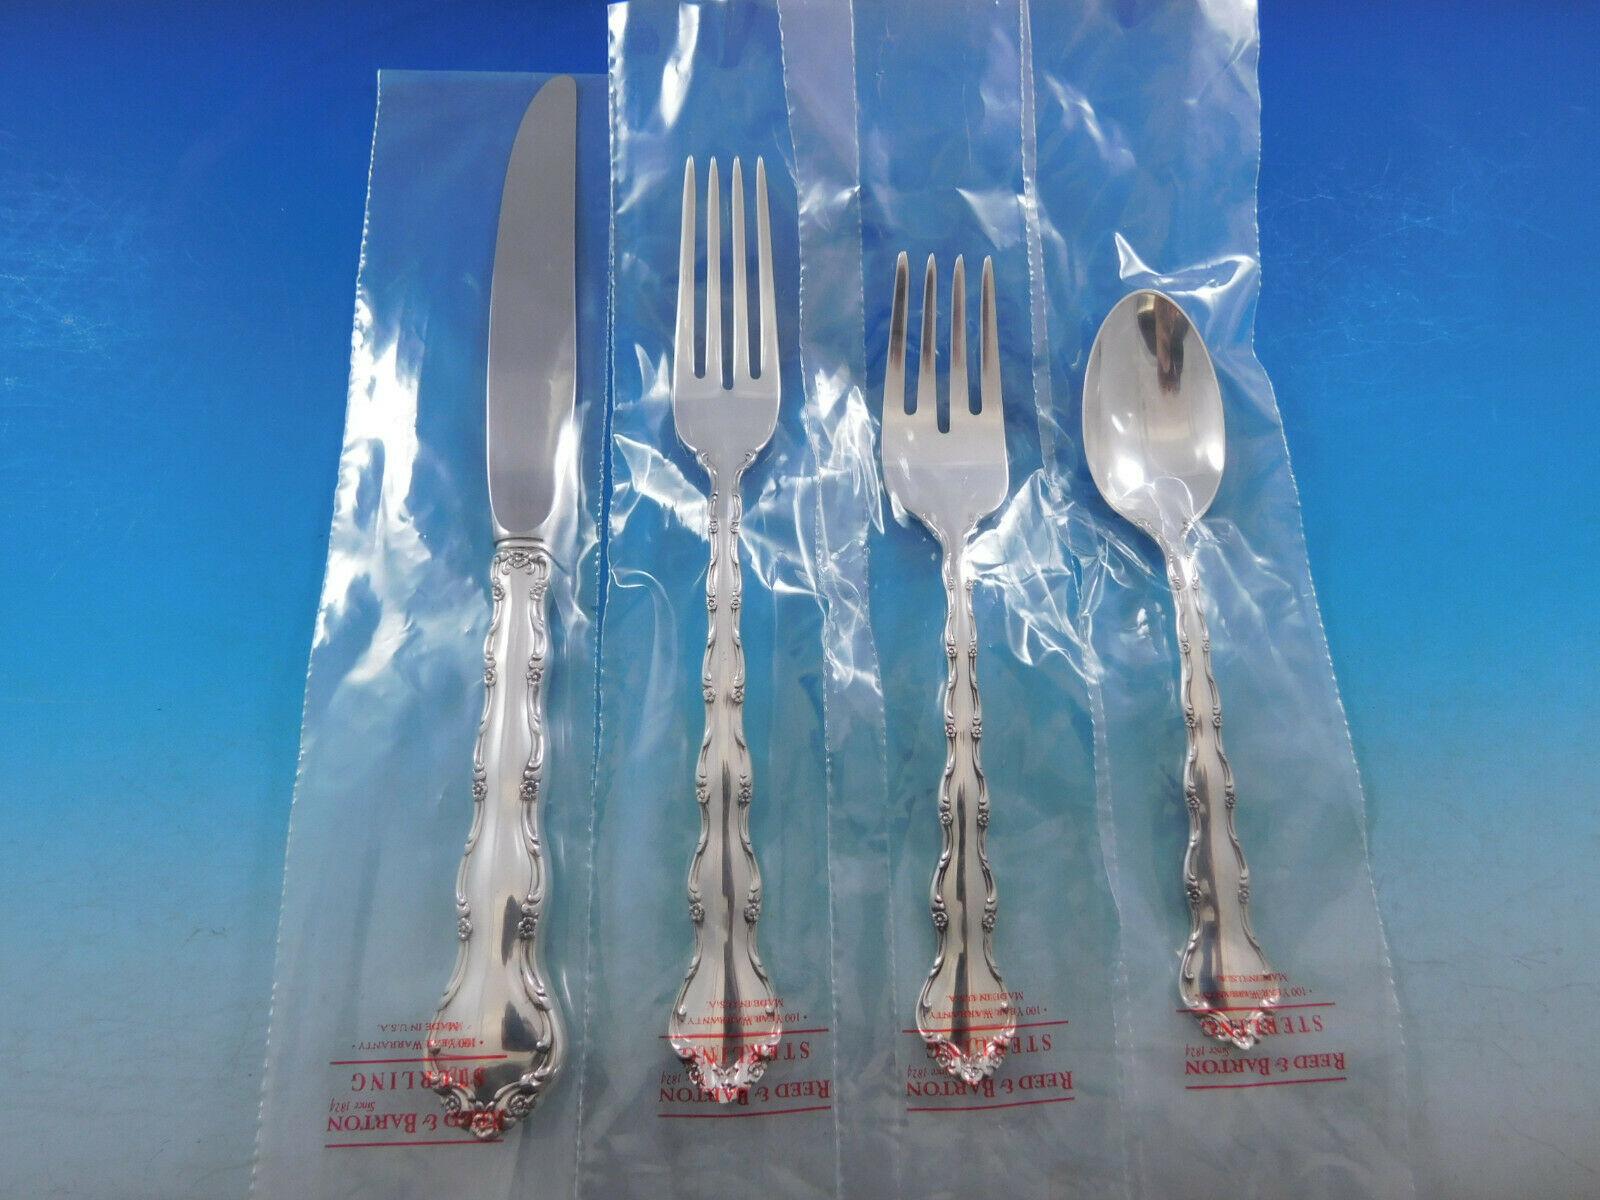 Unused Tara by Reed and Barton sterling silver Flatware set, 55 pieces. This set includes:

12 Knives, 9 1/8